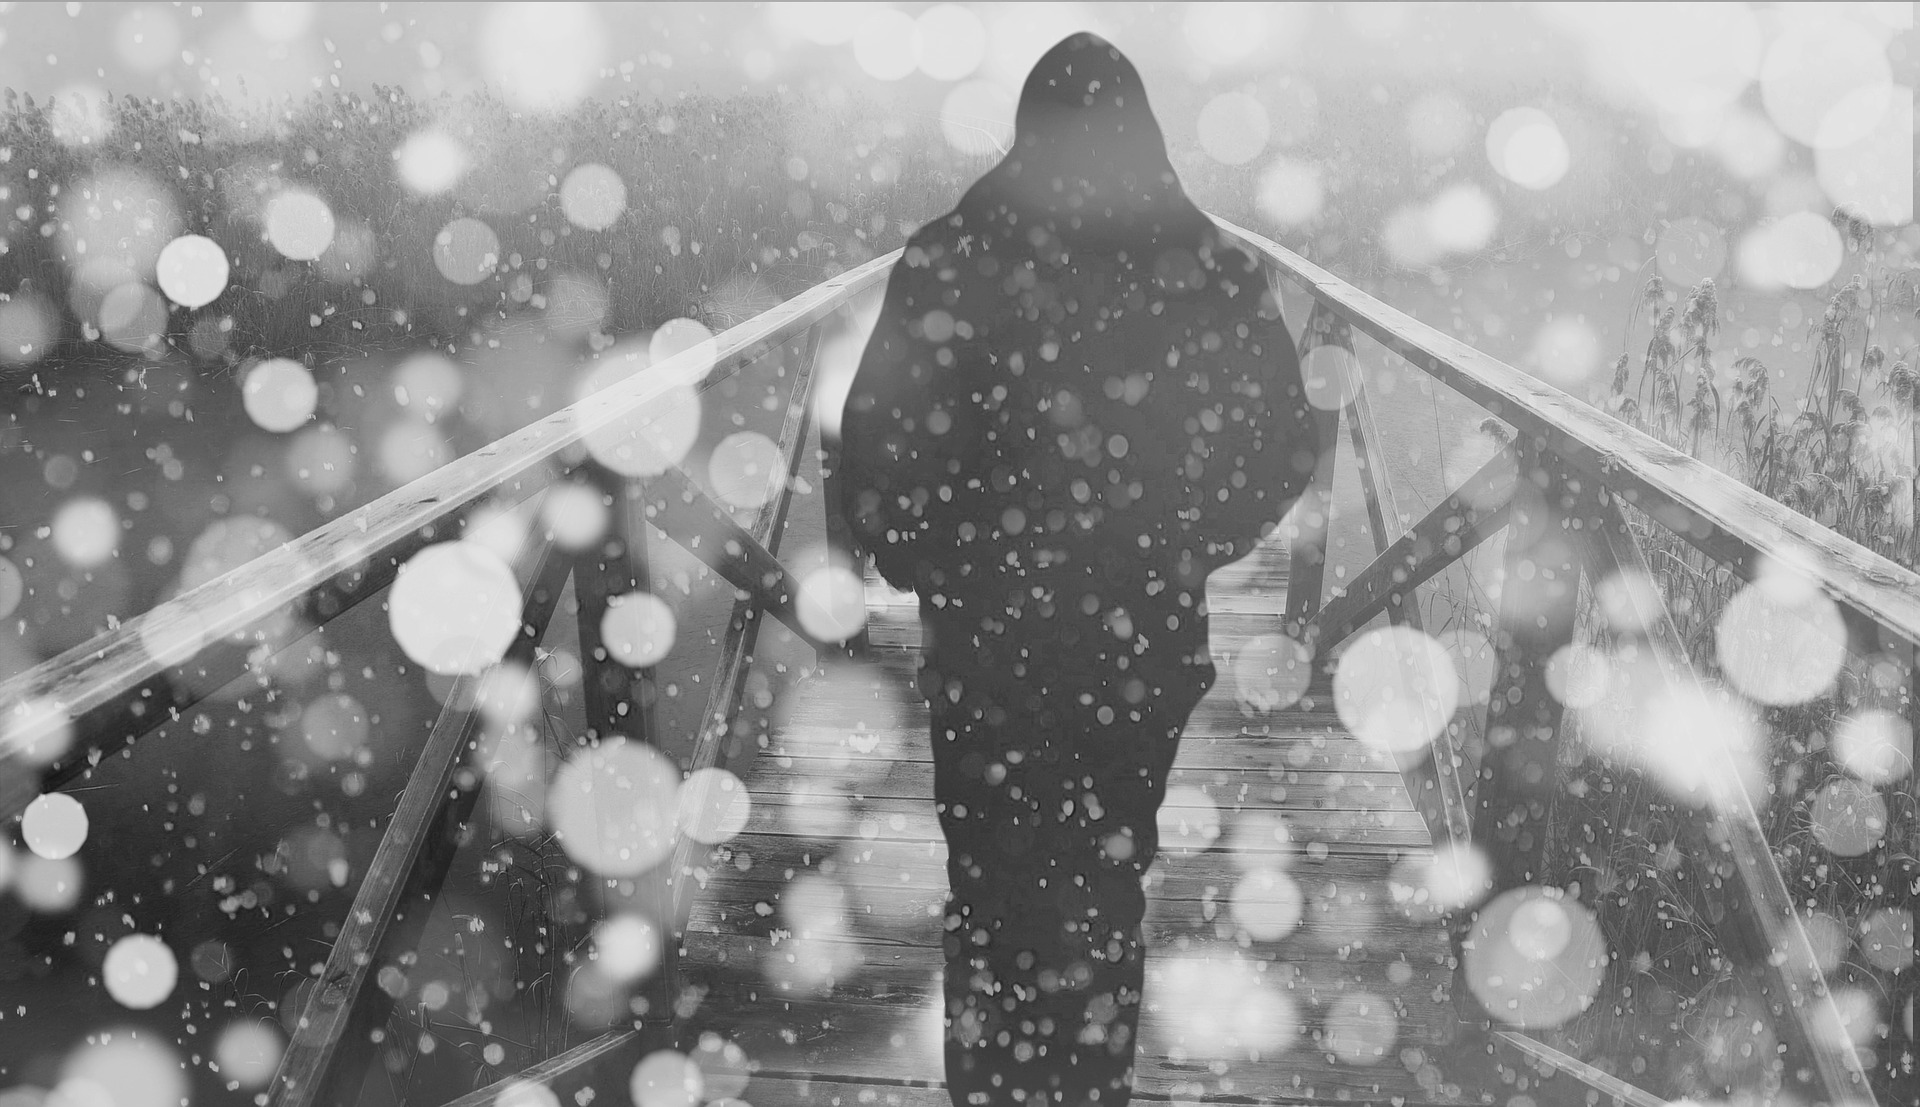 SEASONAL AFFECTIVE DISORDER | HOW TO BEAT THE WINTER BLUES